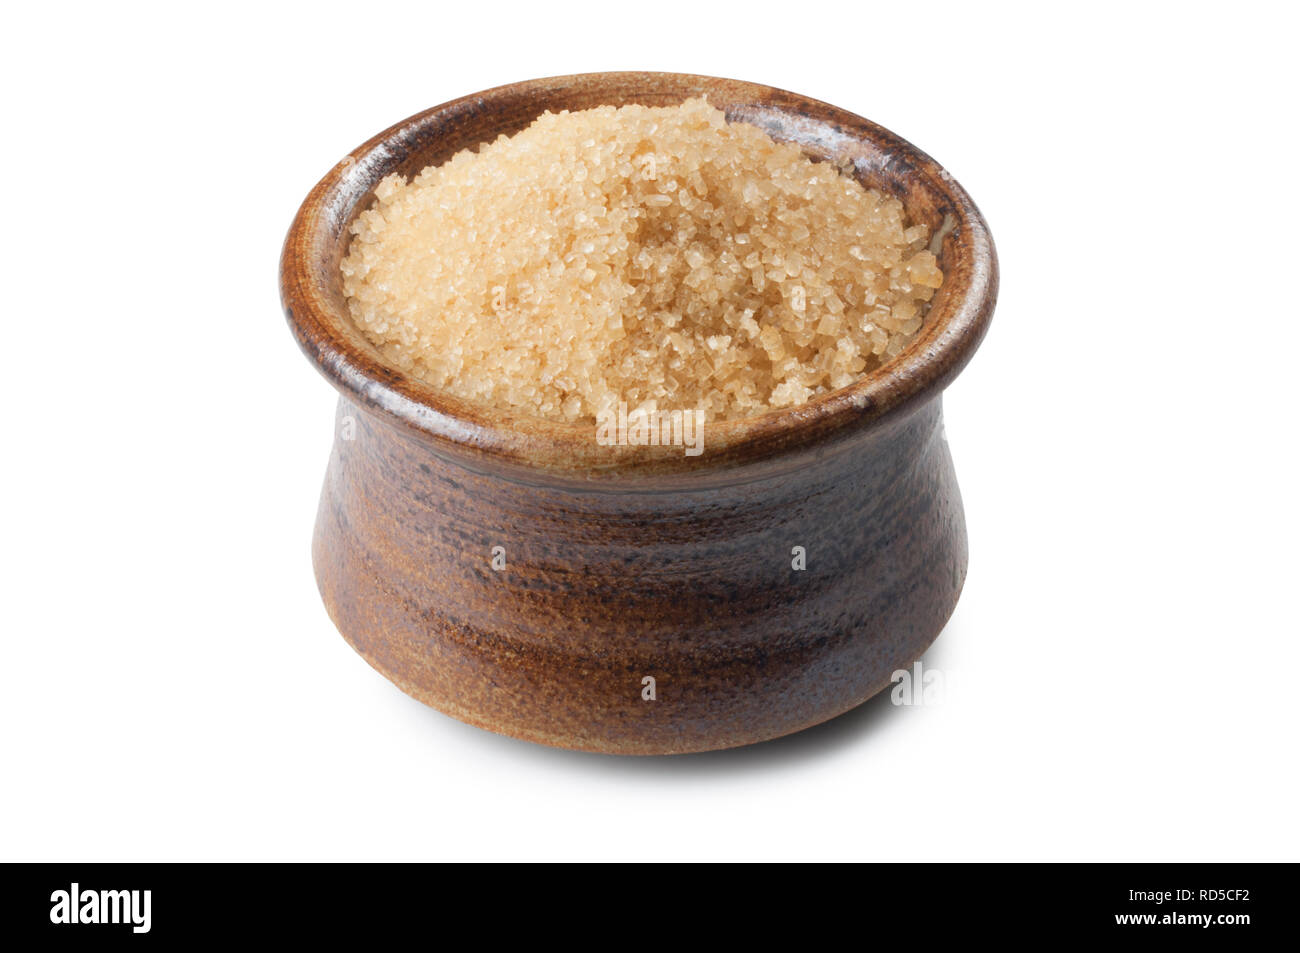 Studio shot of a pot of brown sugar isolated on white background - John Gollop Stock Photo